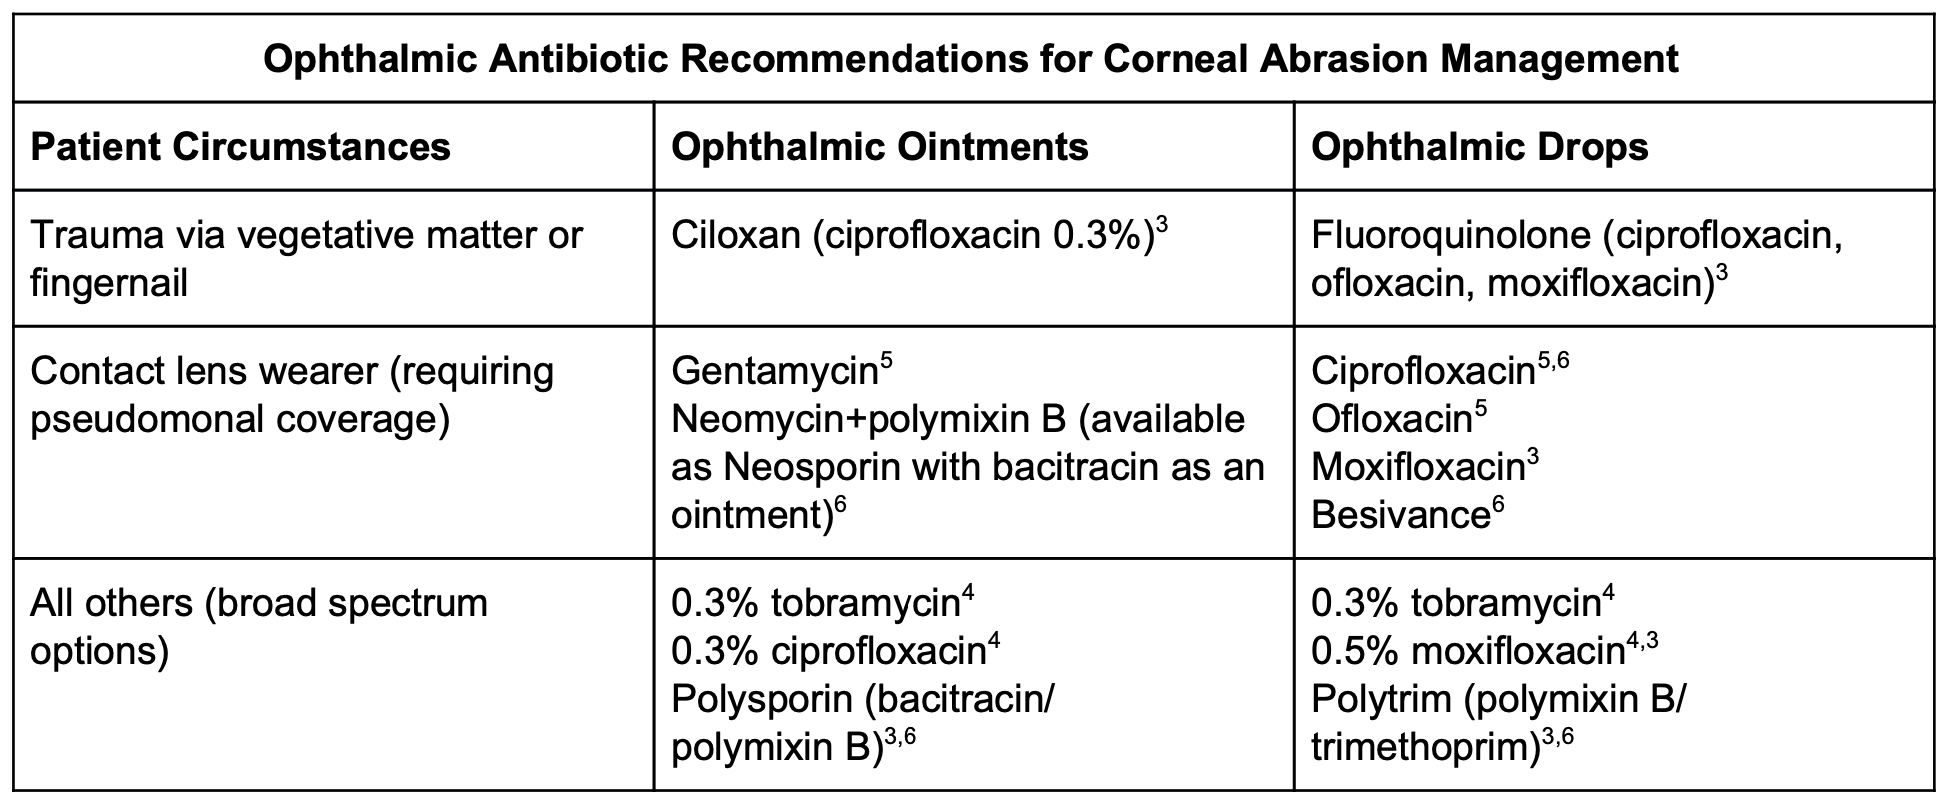 Ophtahlmic antibiotic recommendations for corneal abrasion management